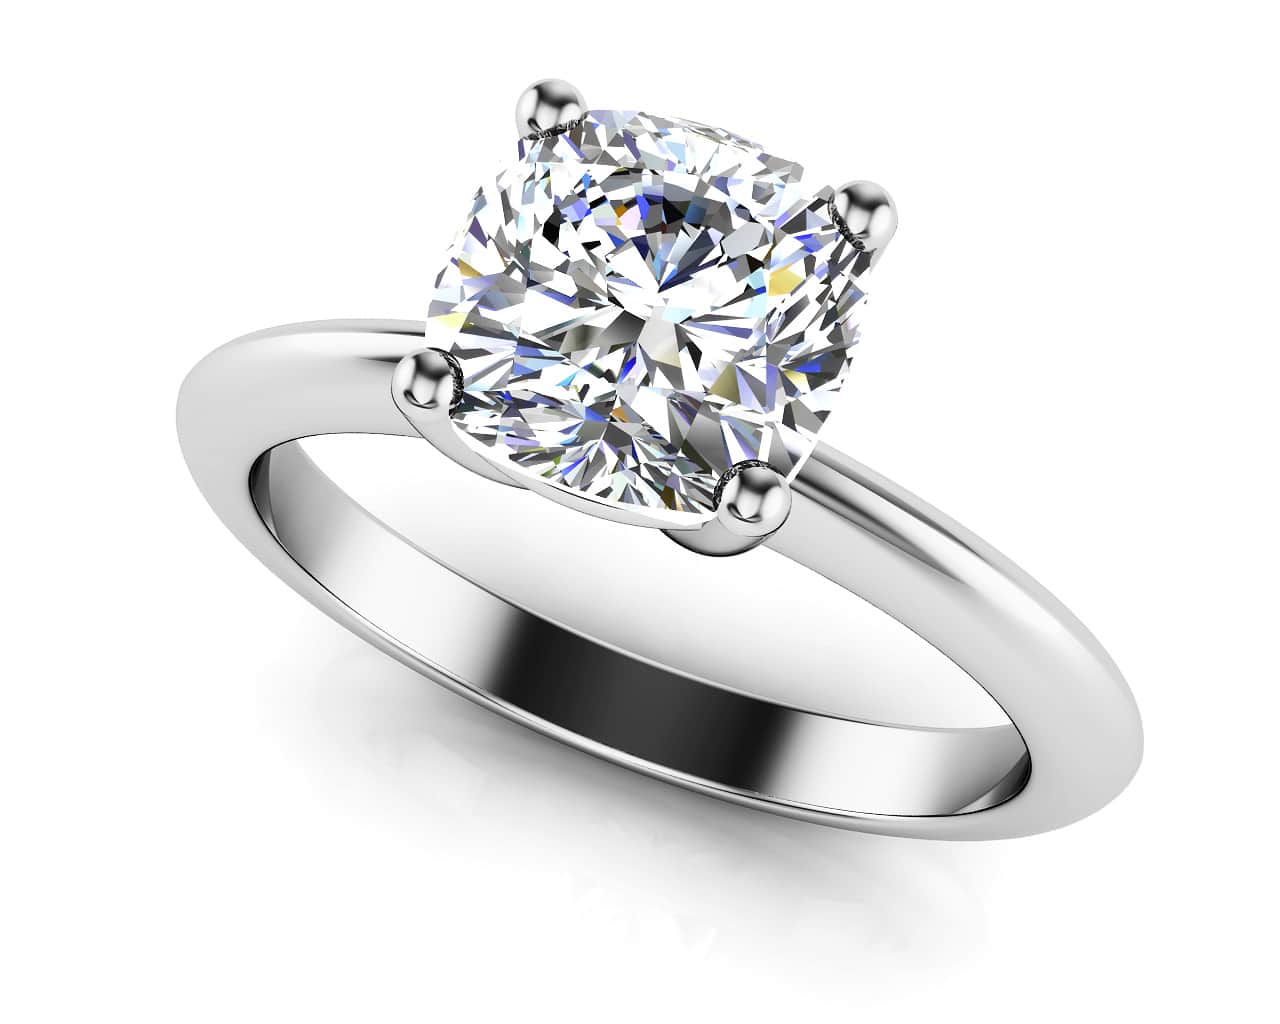 Captivating Cushion Cut Solitaire Engagement Ring 1/2 Carat Total Weight